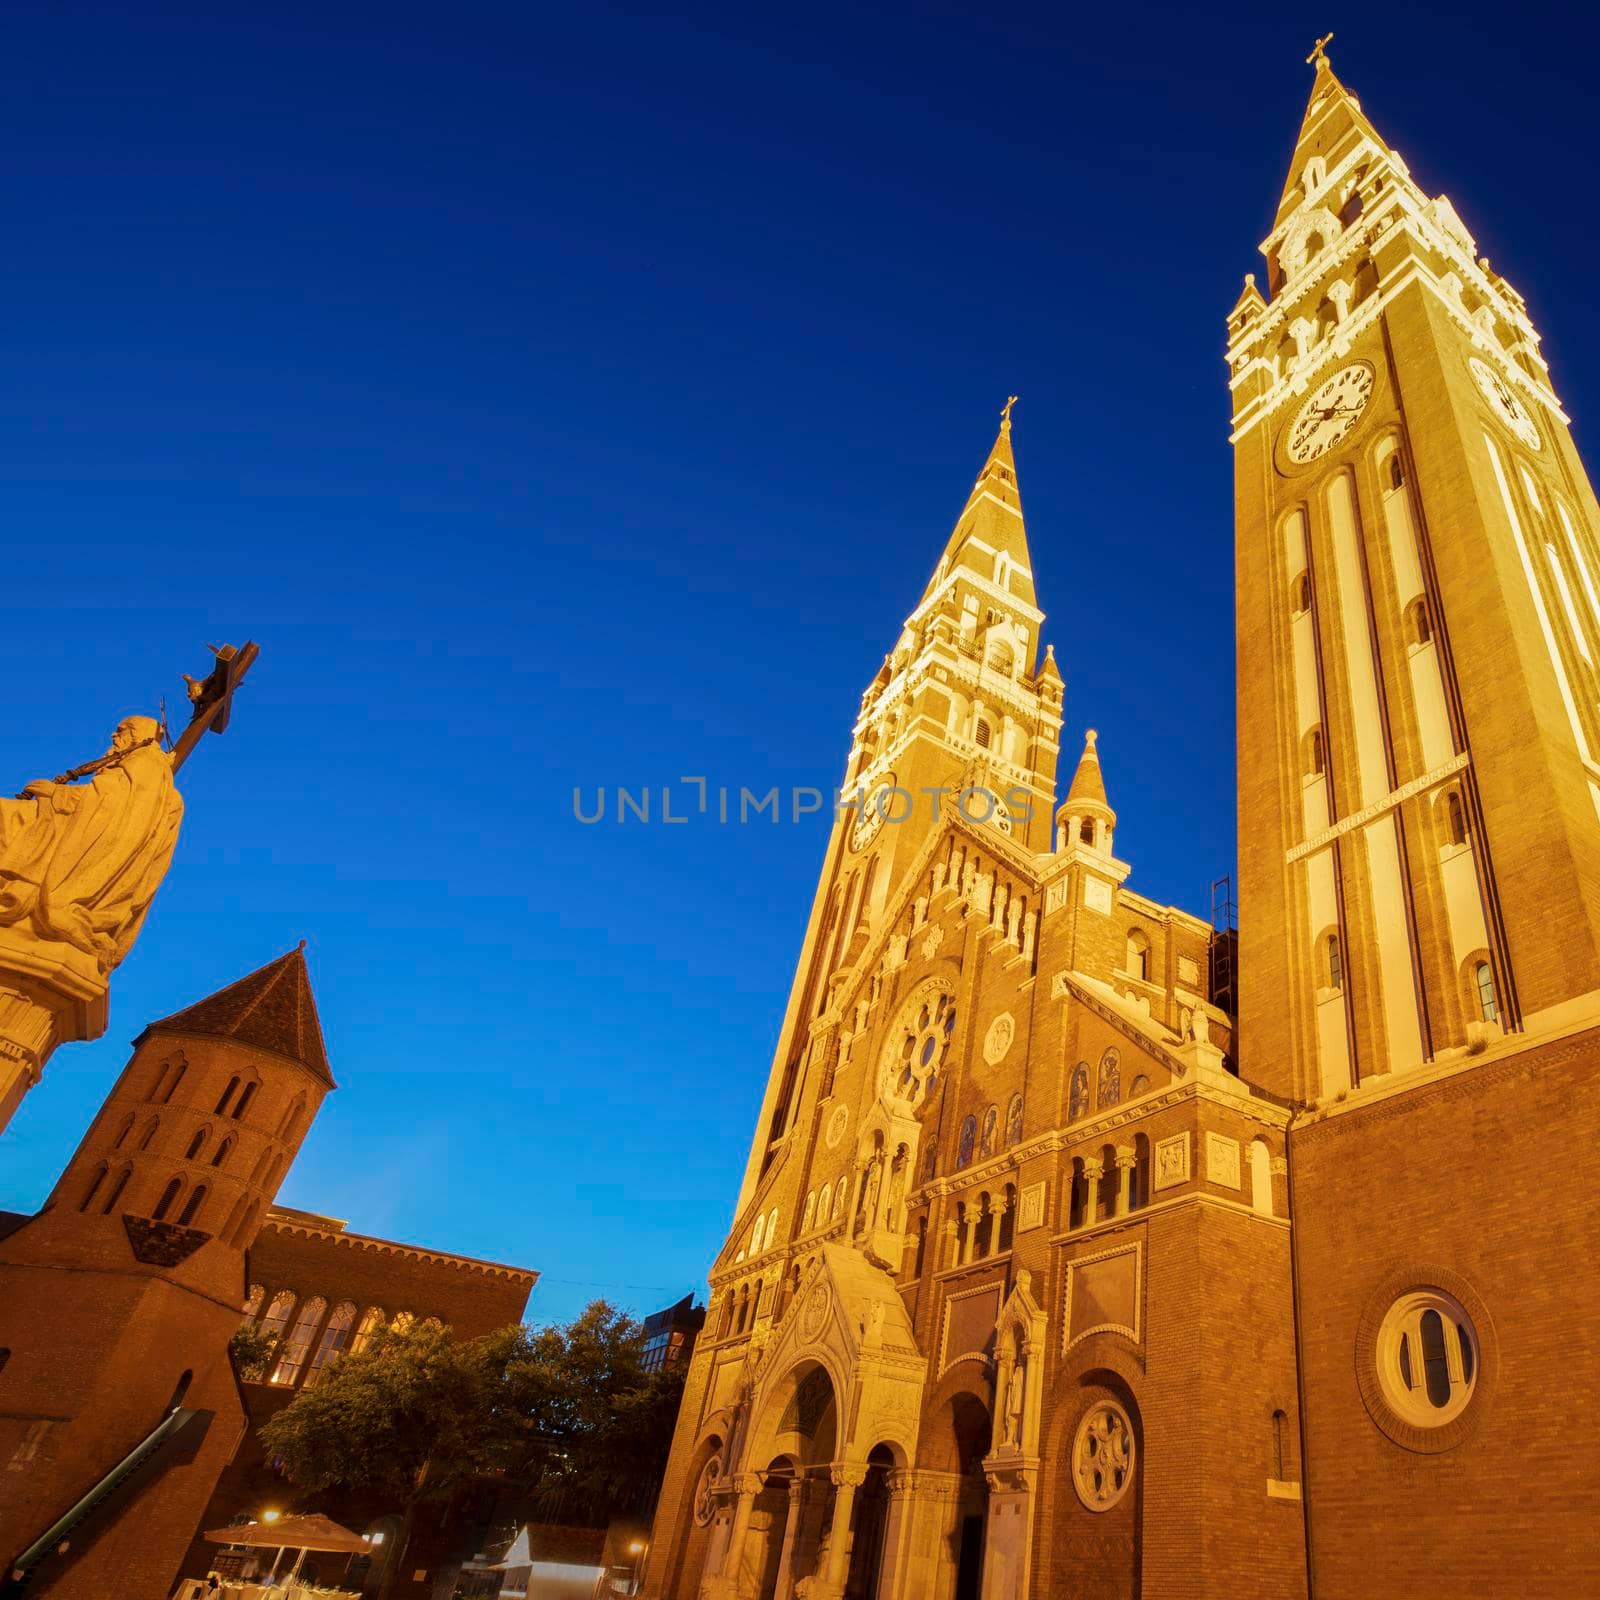 Cathedral of Our Lady in Szeged. Szeged, Csongrad, Hungary.